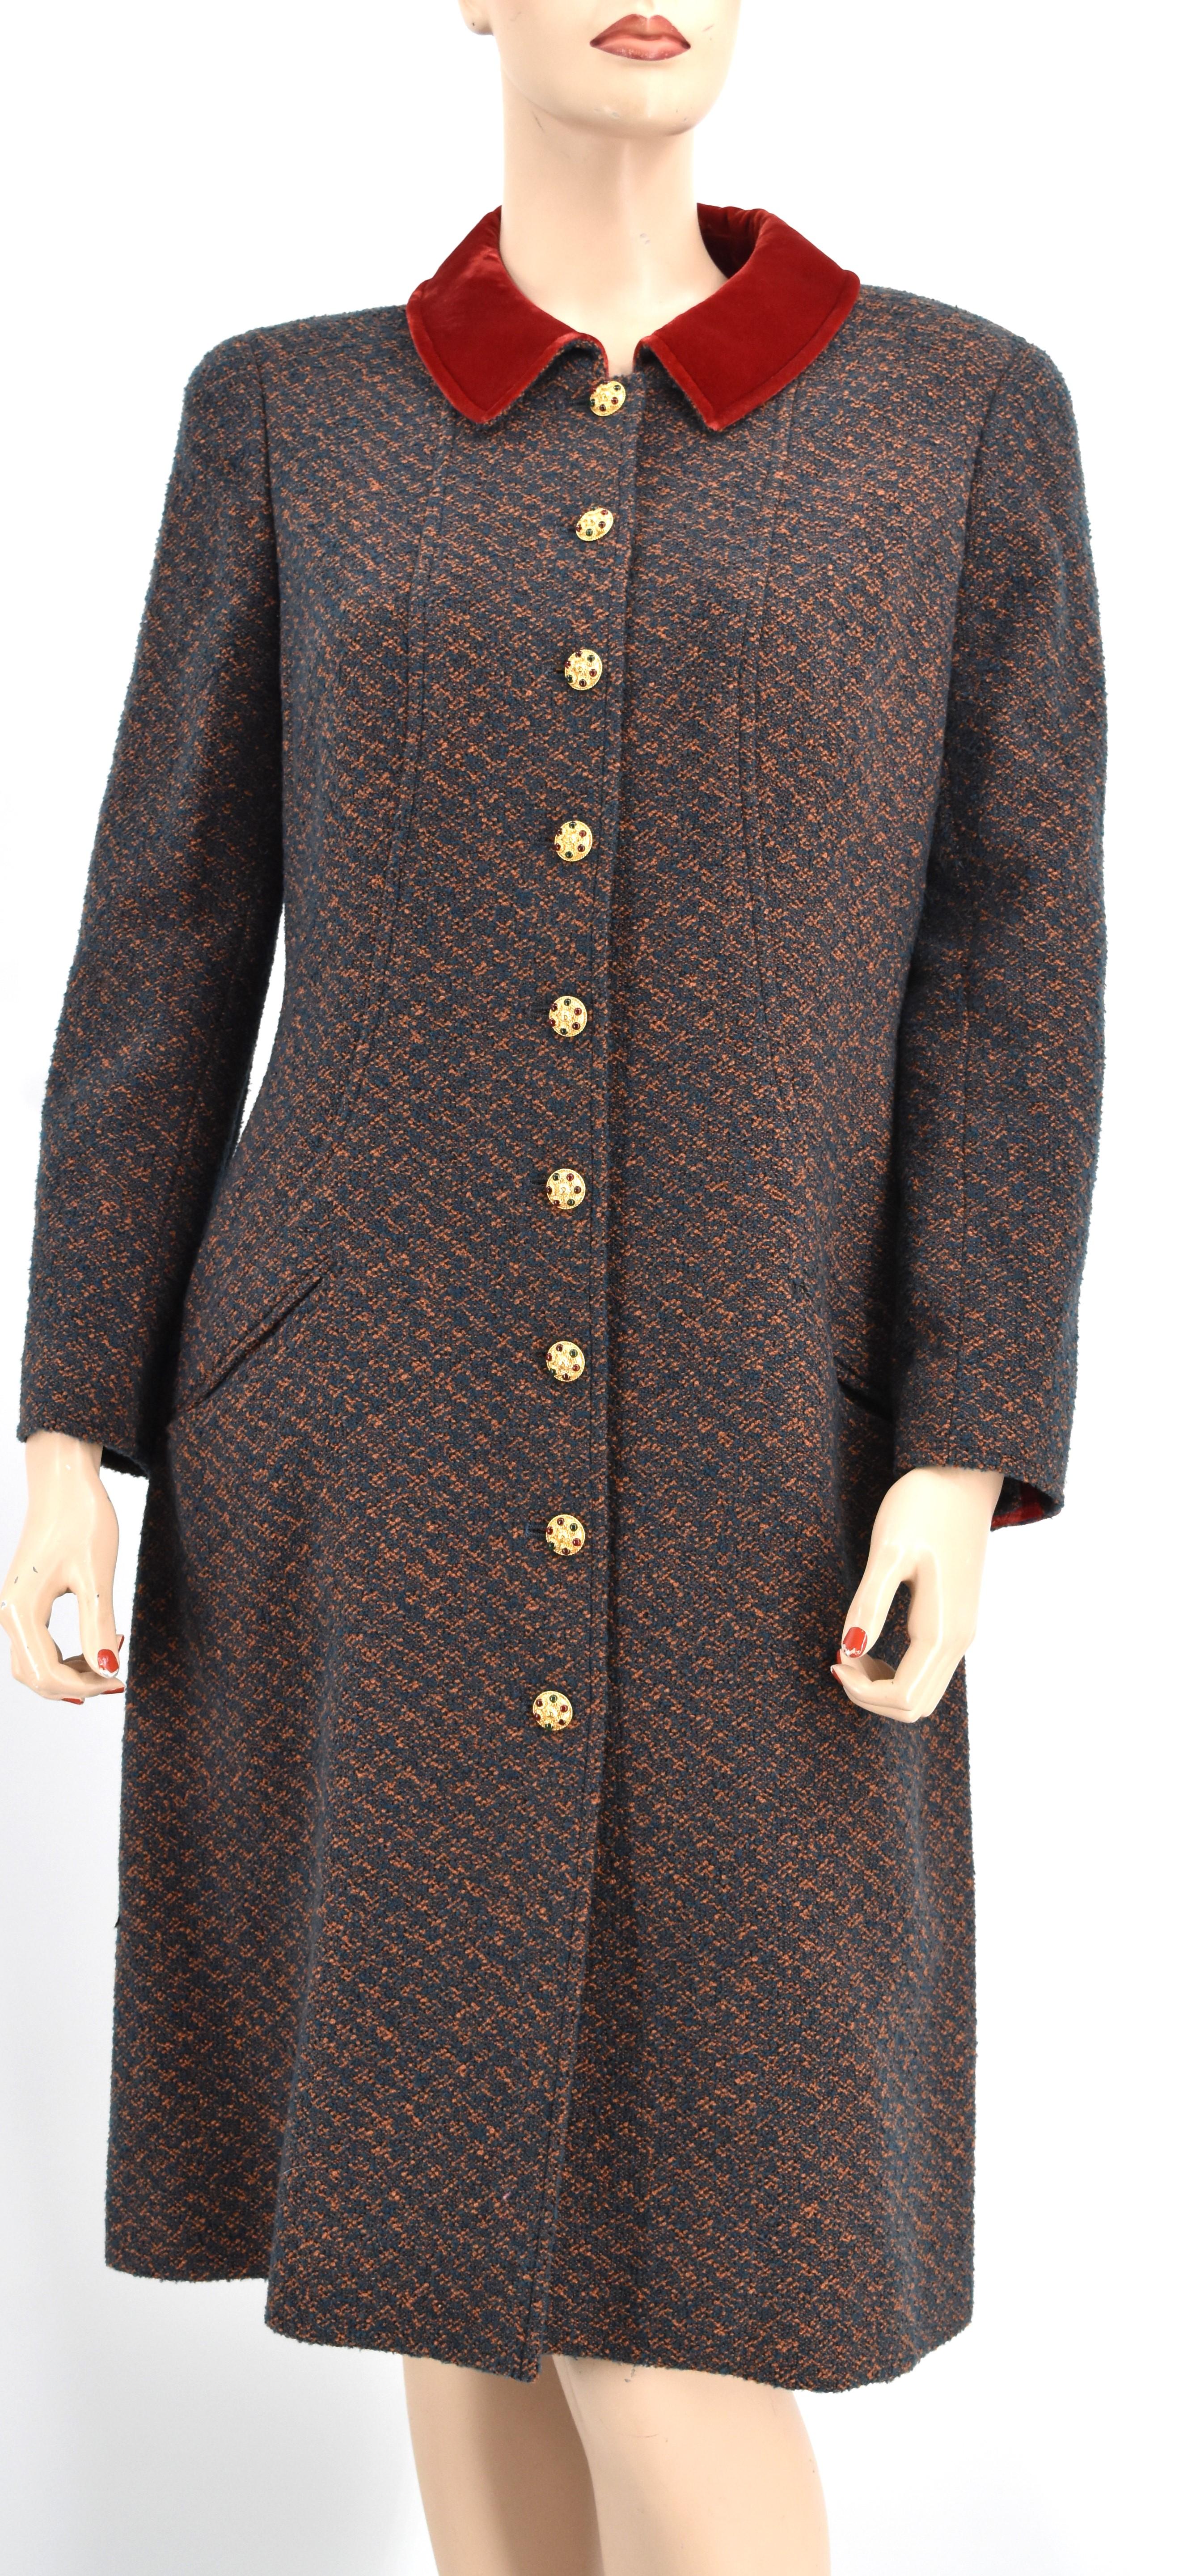 Chanel most wanted 1996 coat with Chanel interlocking CC logo gripoix buttons. This is in excellent flawless condition.